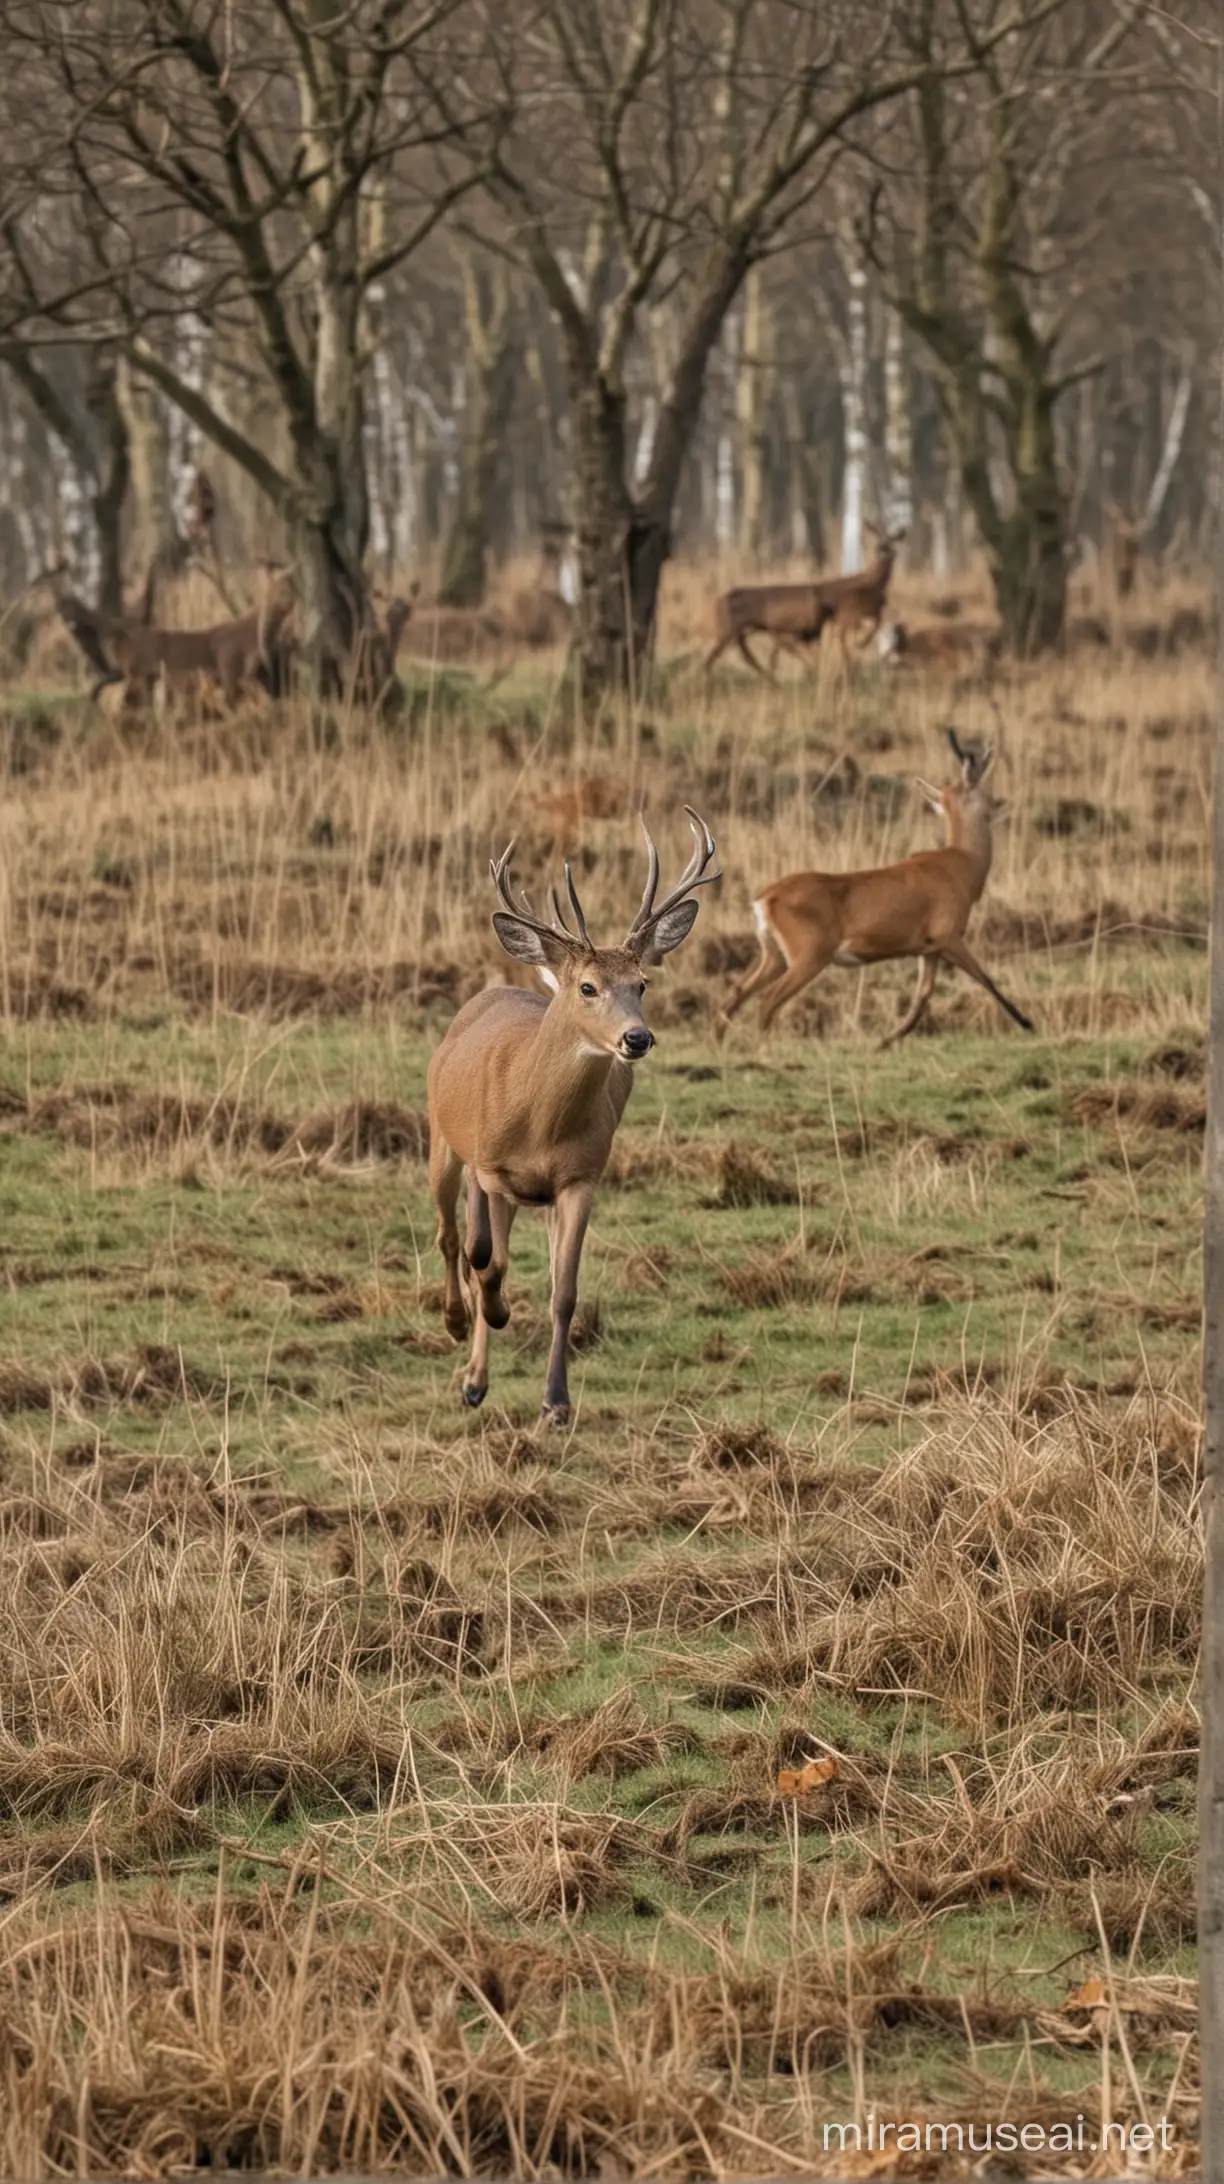 A roe deer runs away from several hunters, a hunter in the background, behind the roe deer